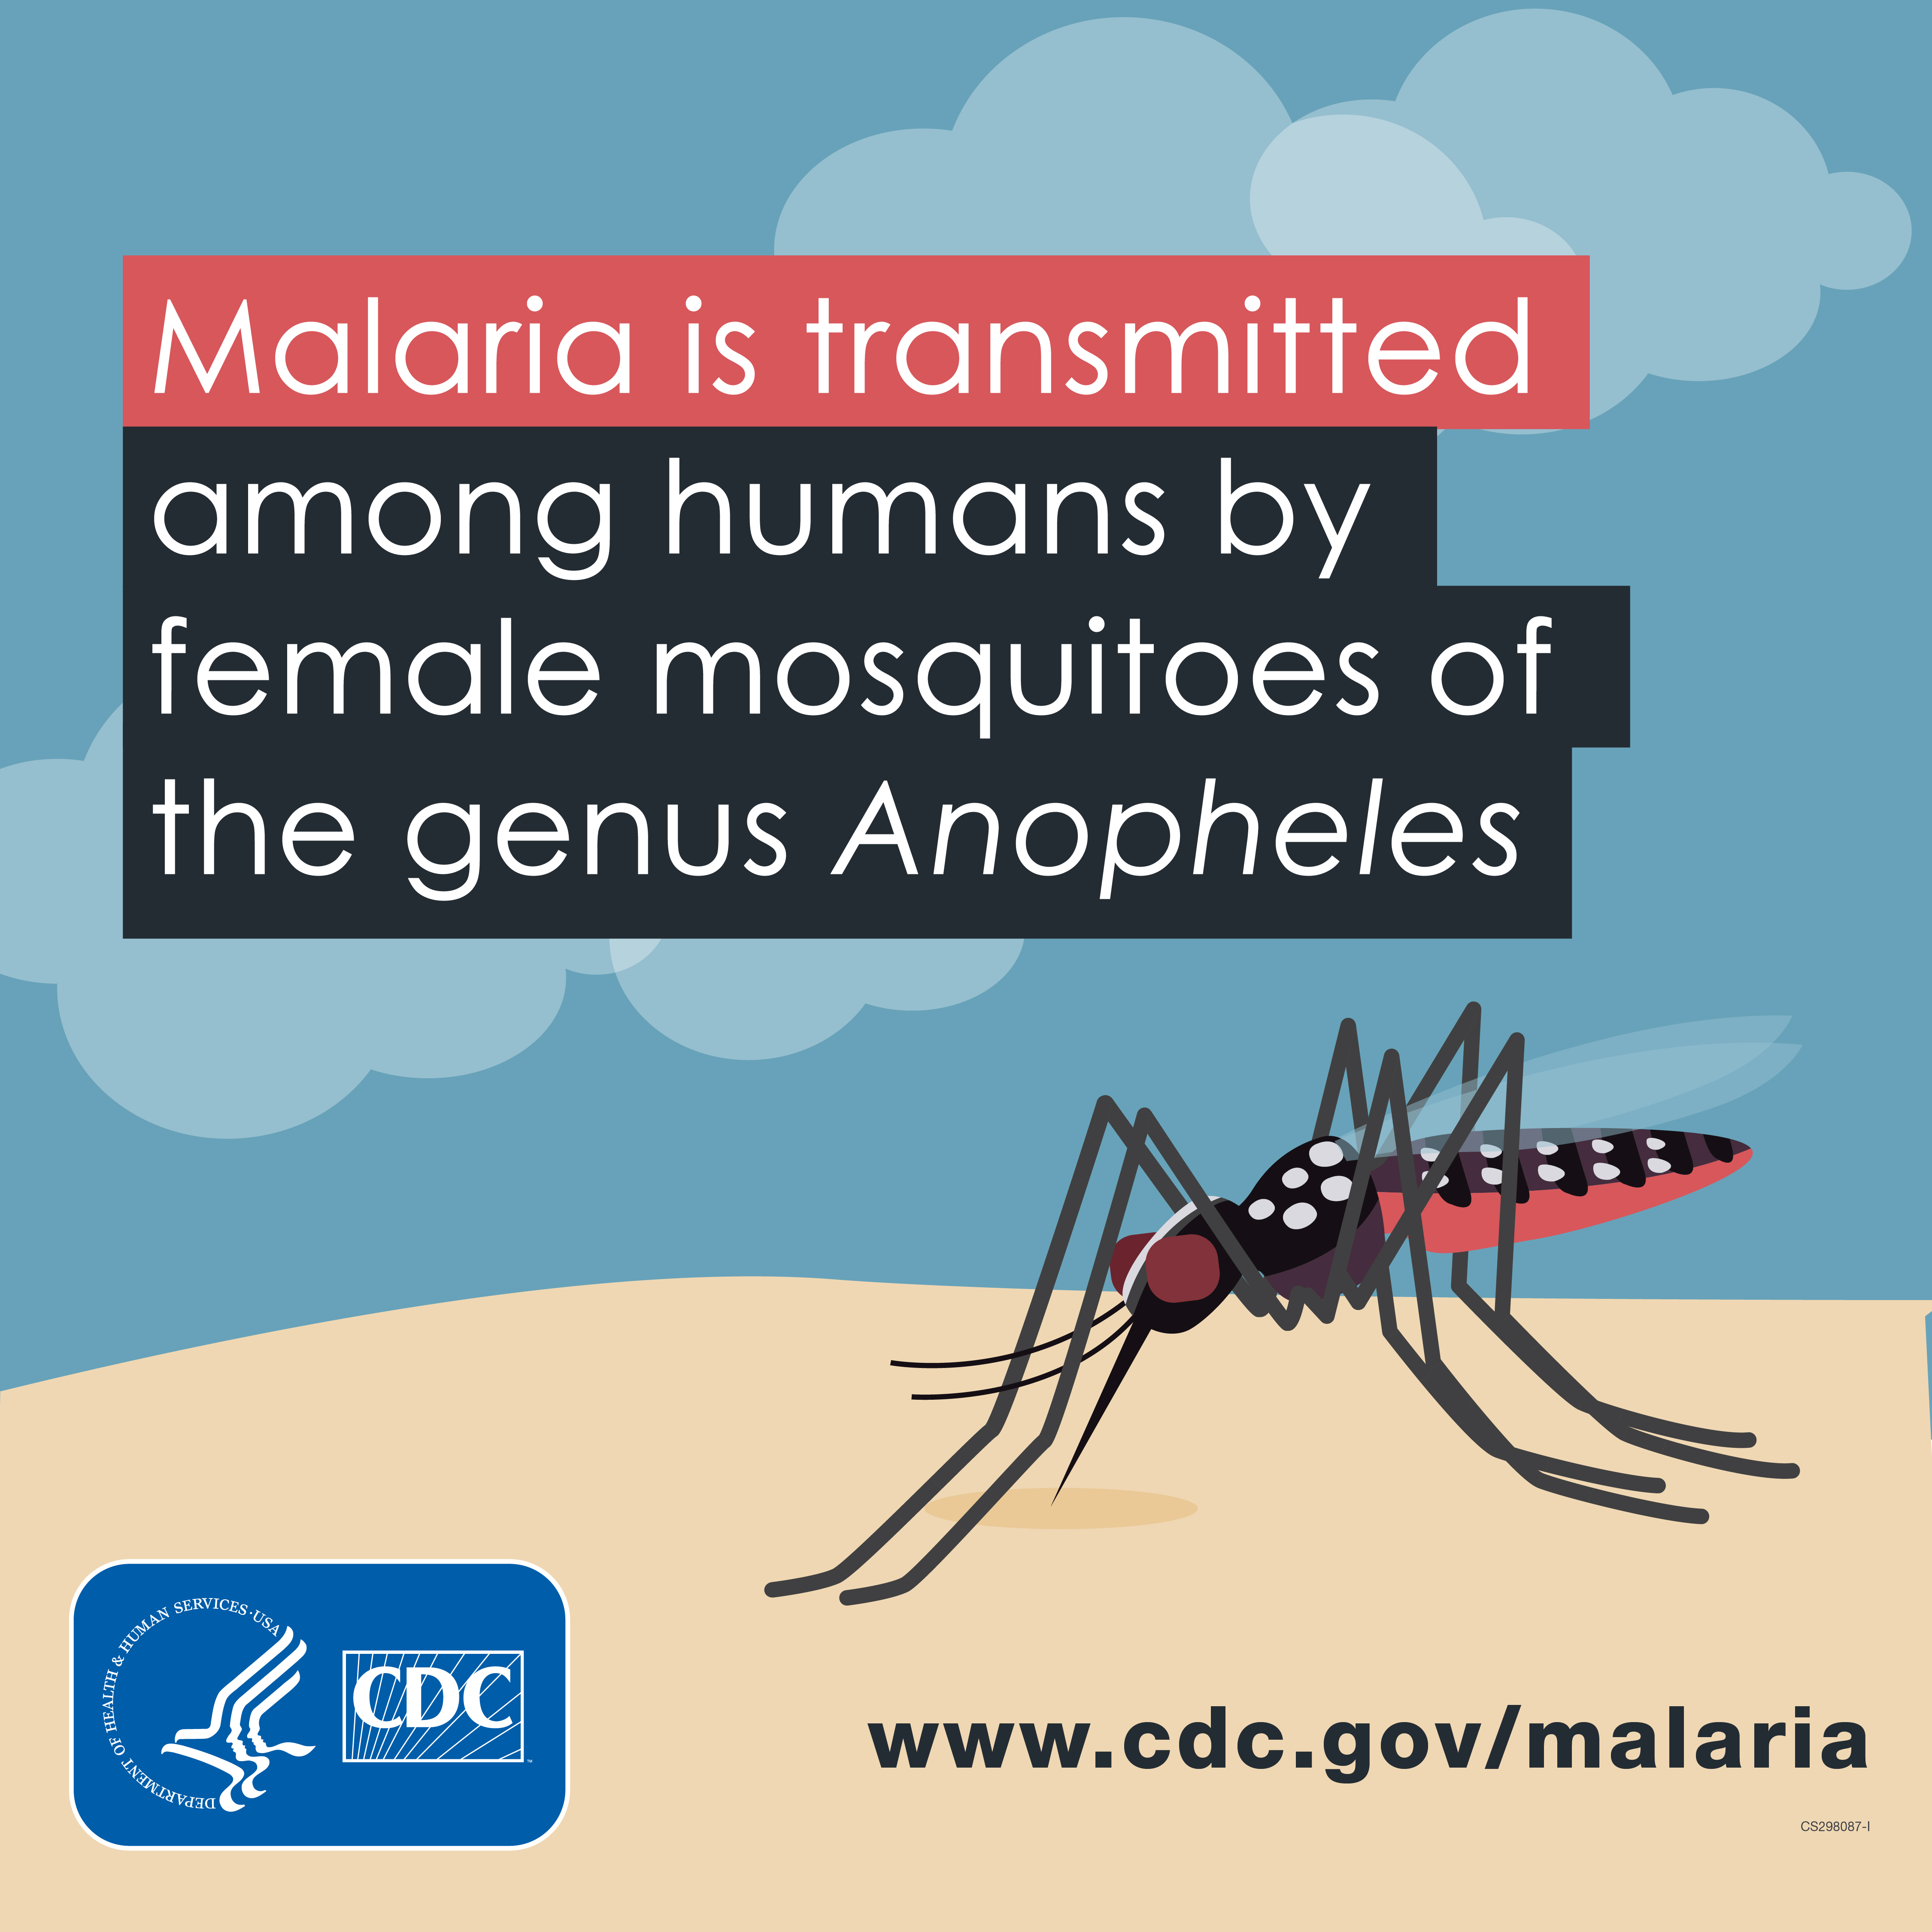 Malaria is trnsmitted among humans by female mosquitoes of rthe genus Anopheles